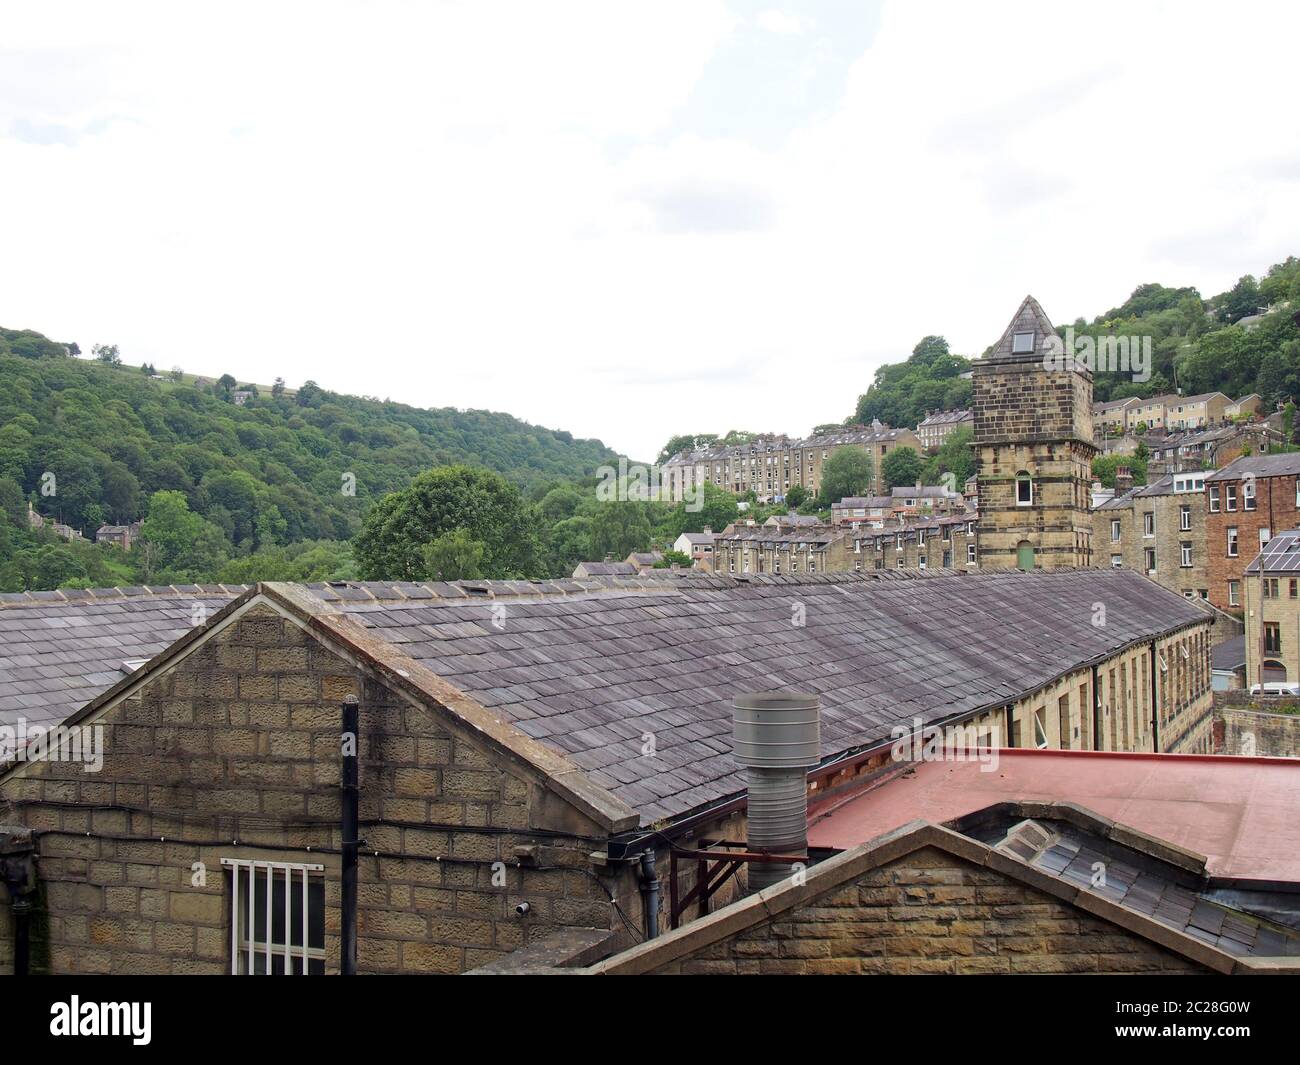 a view of the steep hillside streets in hebden bridge between summer trees with the tower of the historic nutclough mill buildin Stock Photo